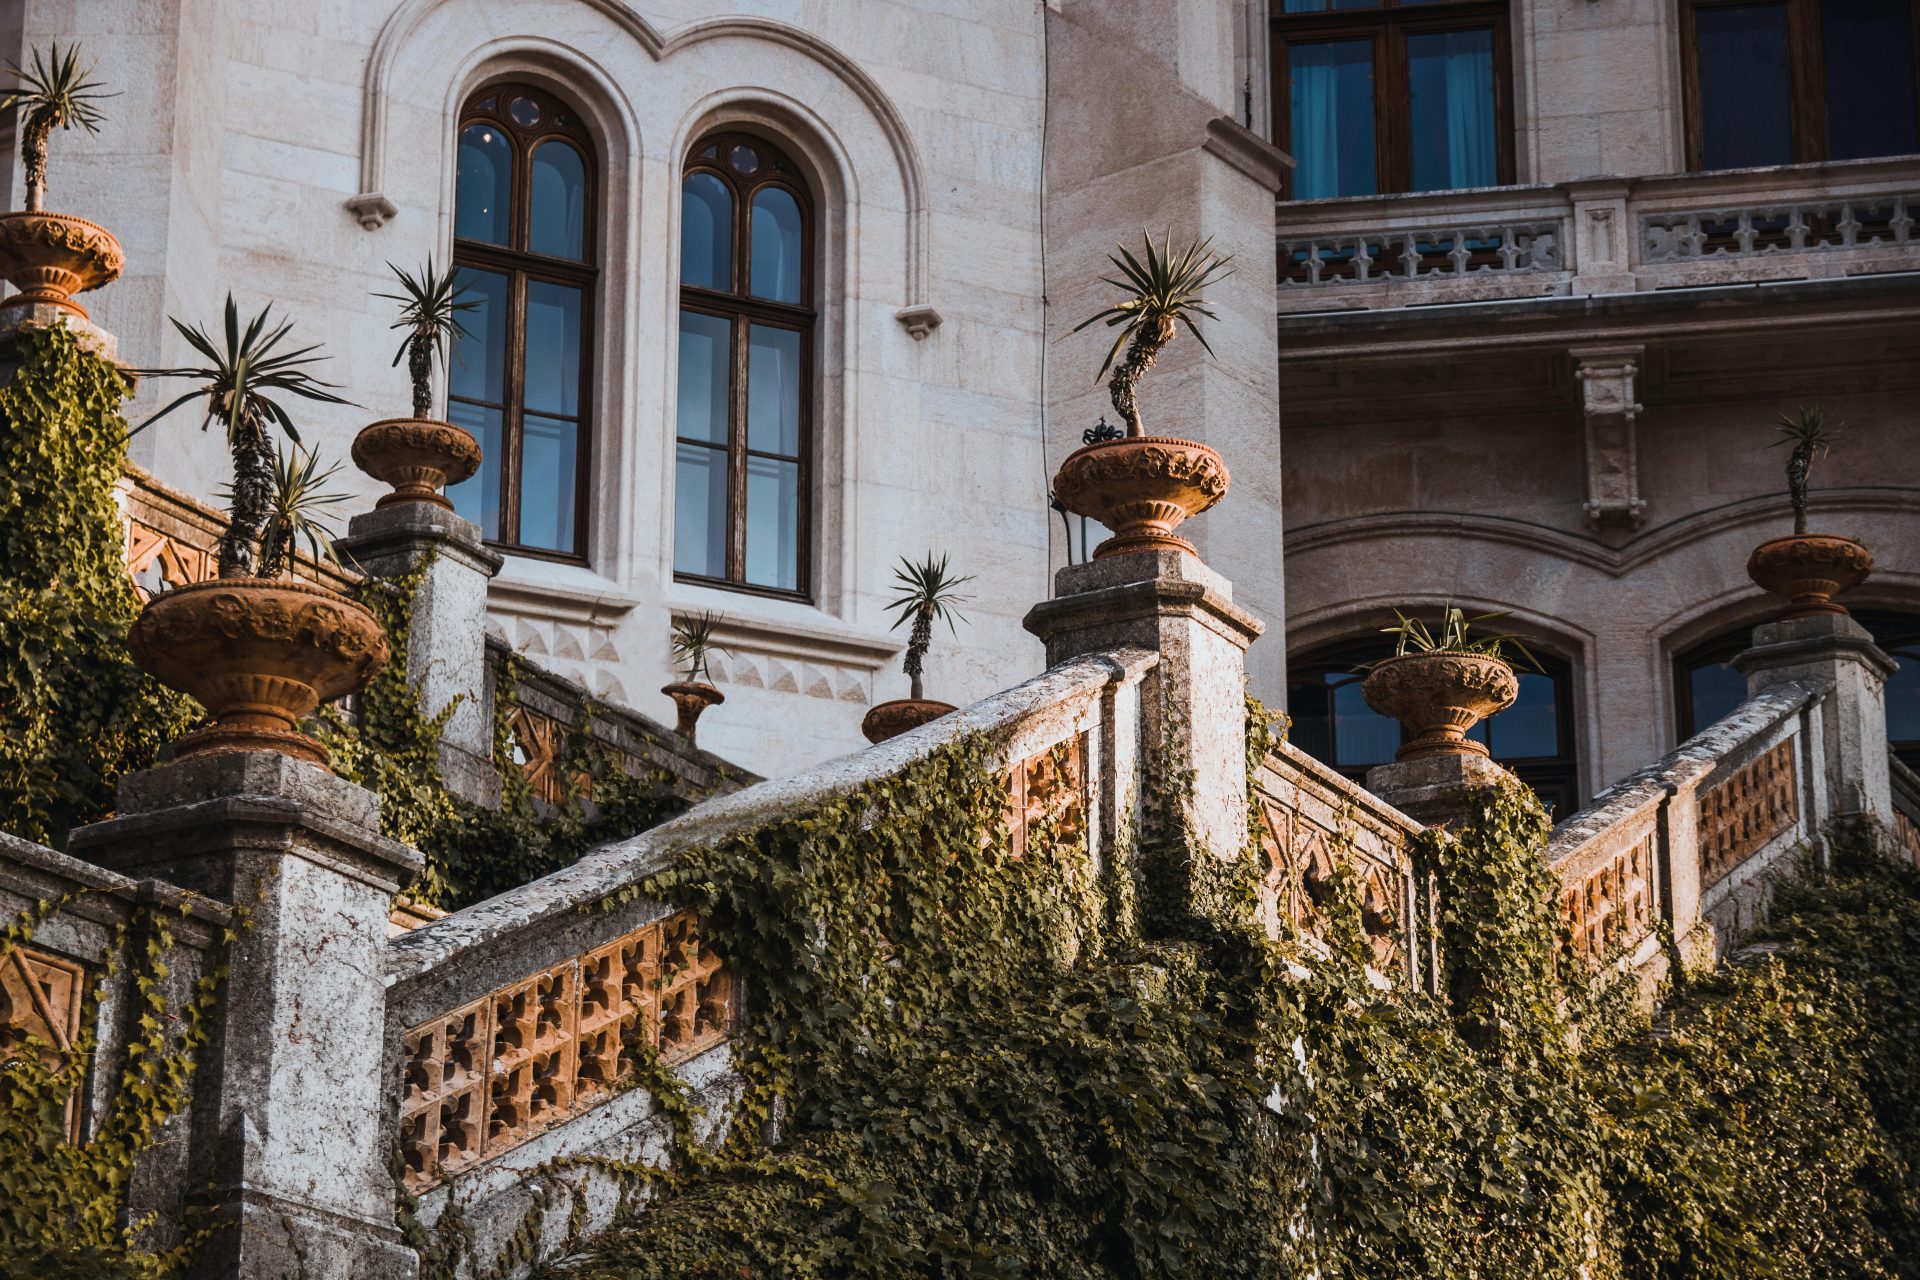 Historical Context and Evolution of Mediterranean Architecture